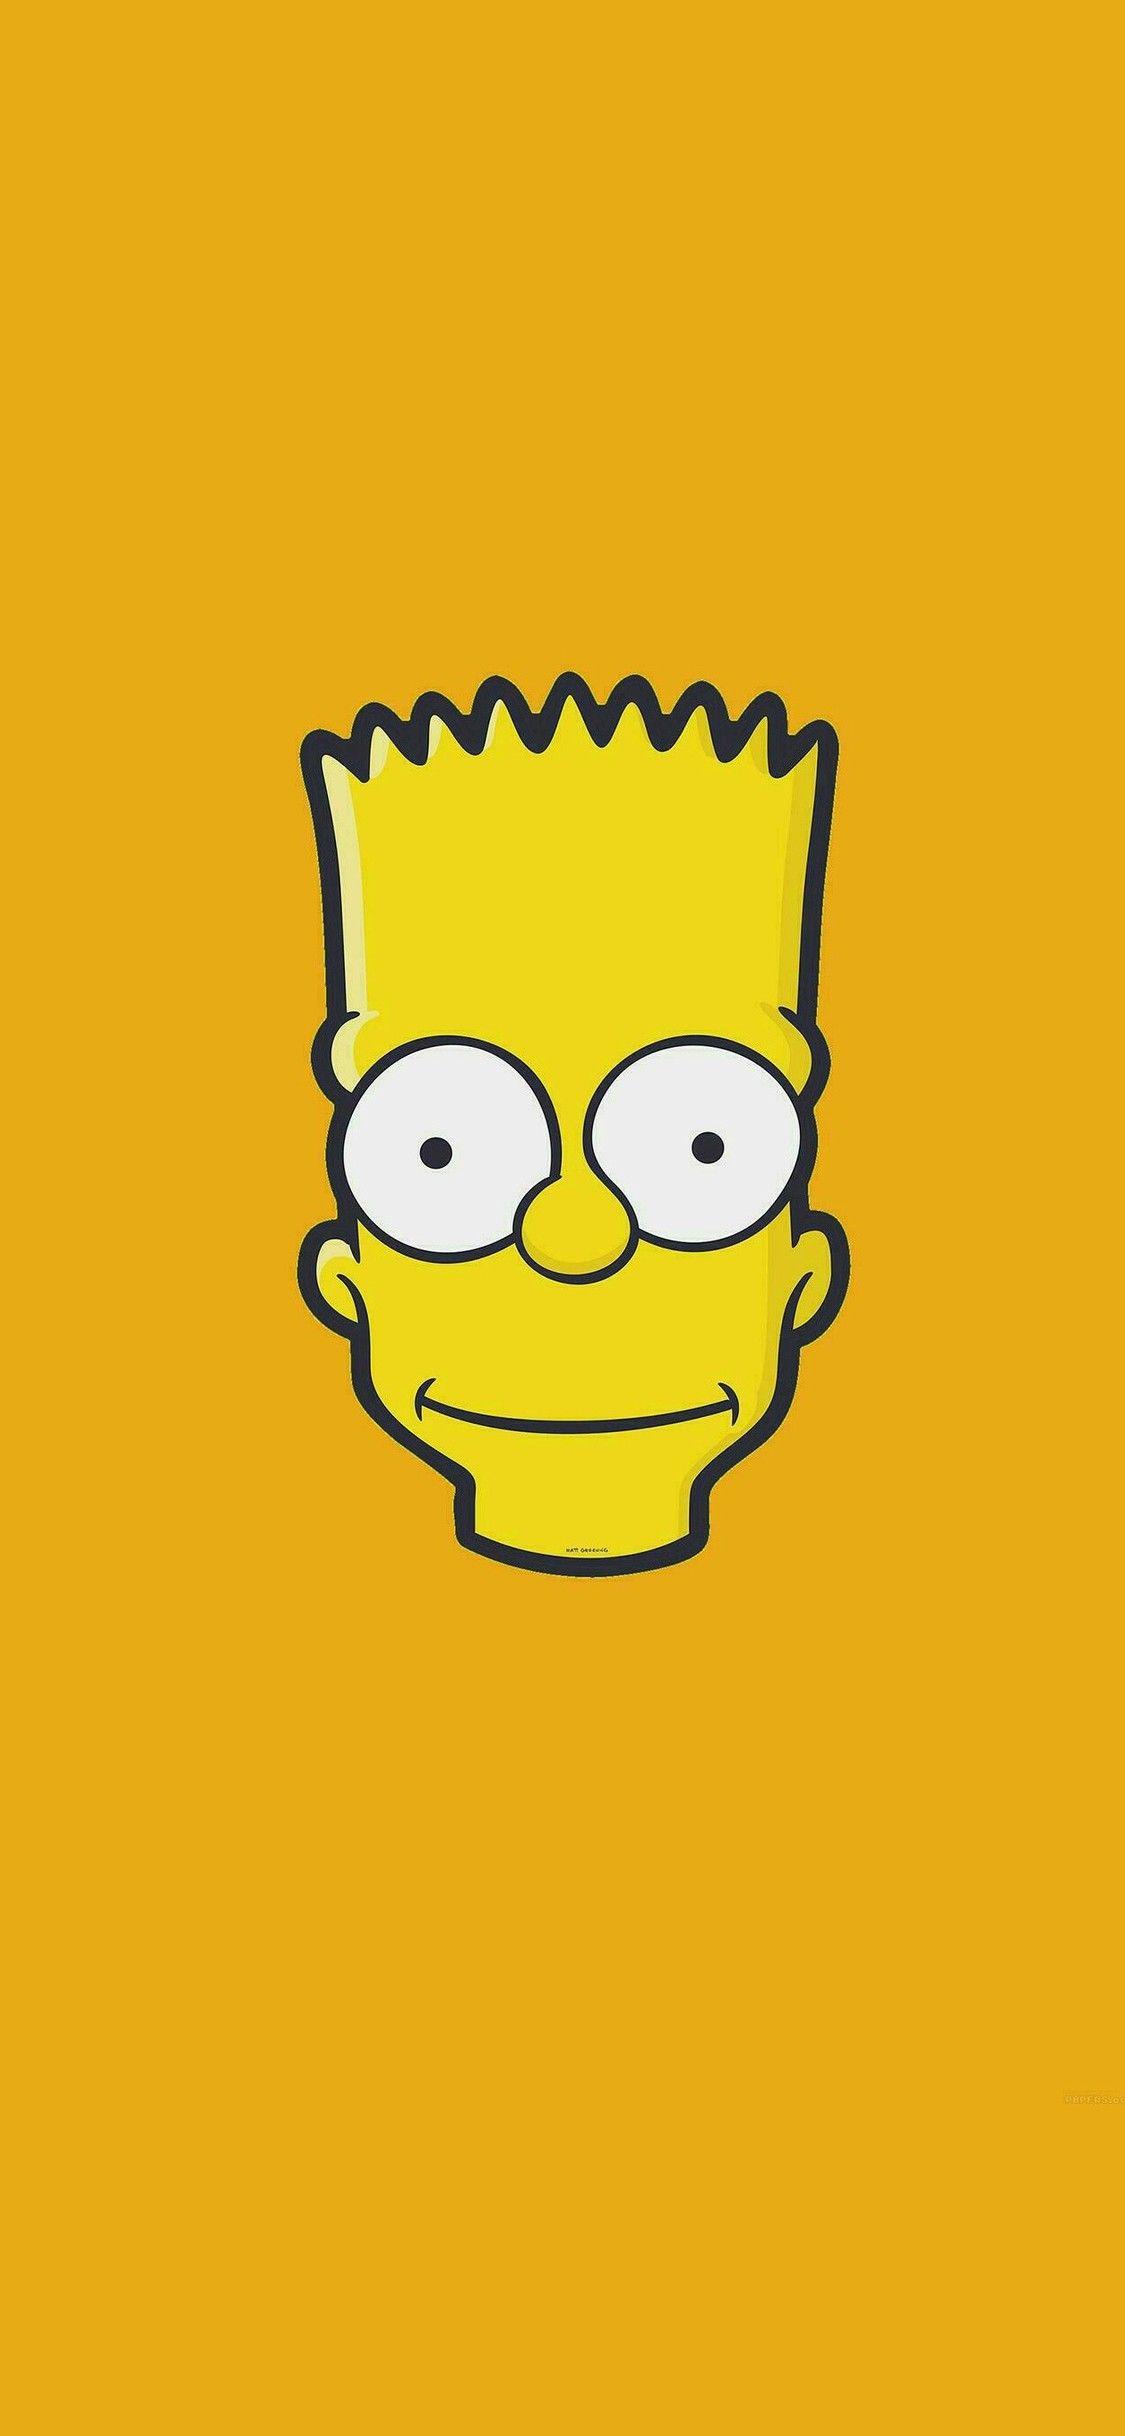 Cool Bart Simpson Wallpaper Discover more cool supreme iphone bart simpson  supreme supeme bart Supreme wallpaper httpswwwnaw  Bart Simpson Bart  simpson